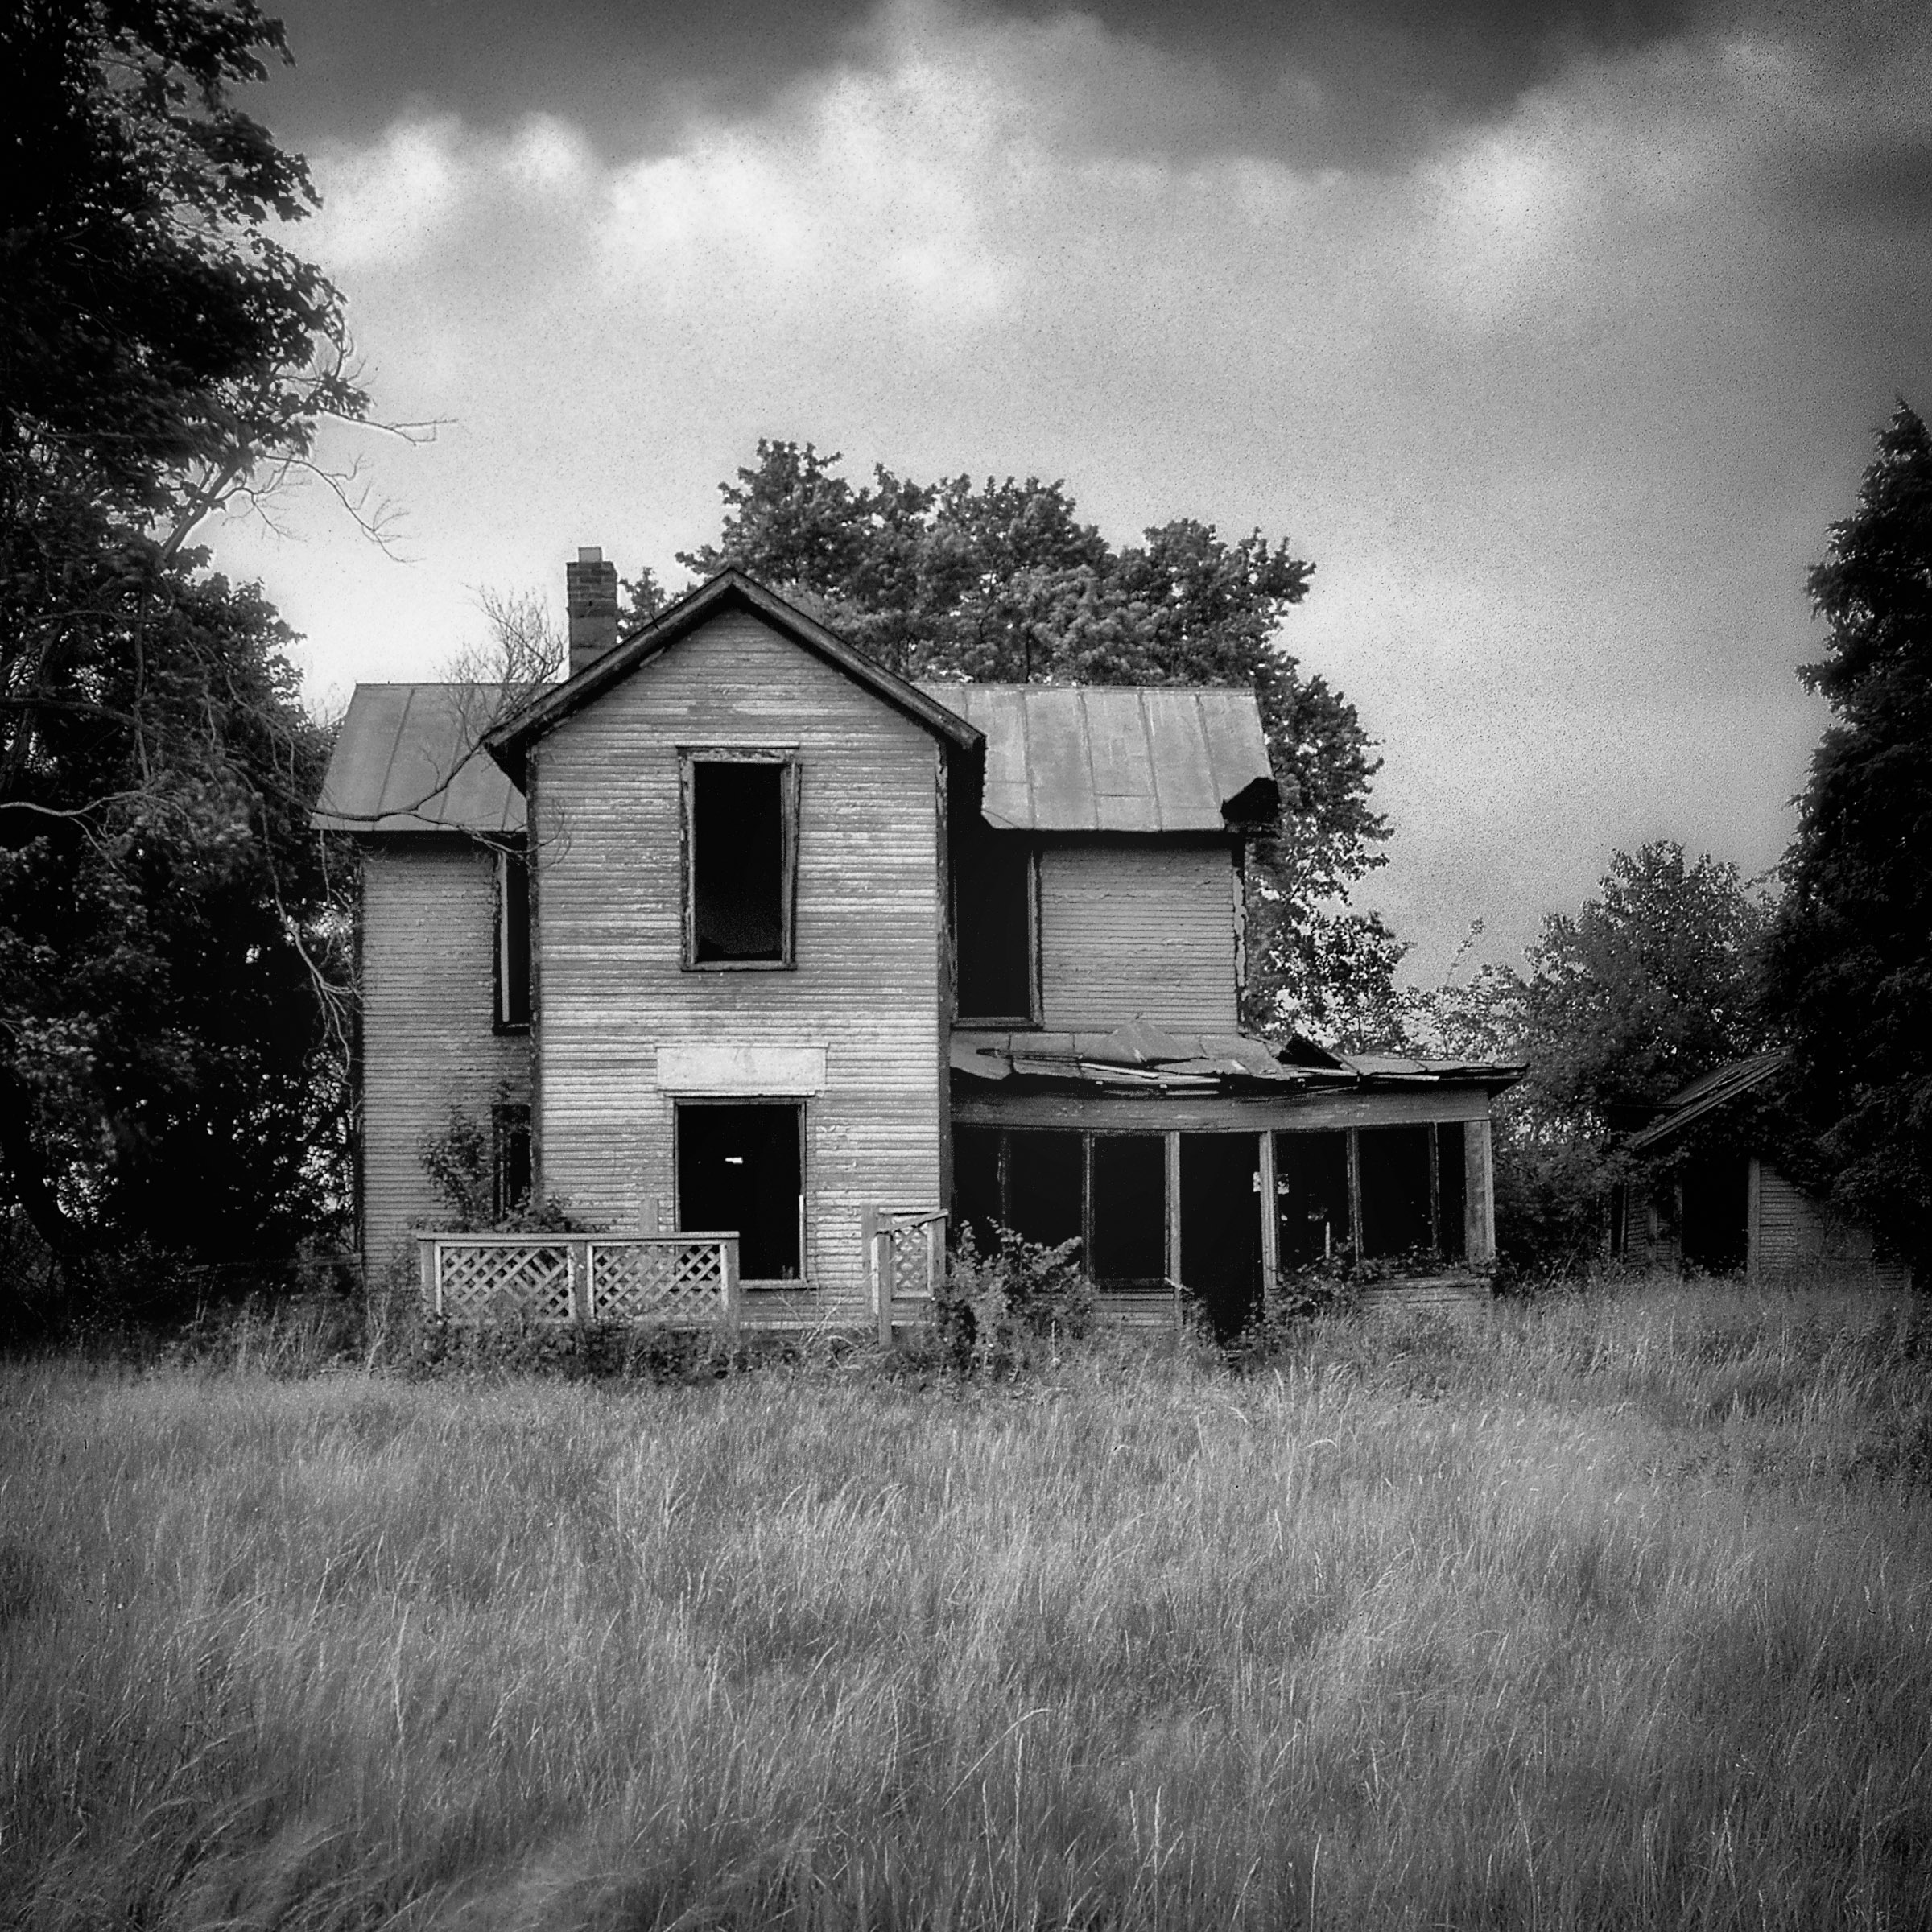 Empty - Black & White Photograph Print of an Abandoned House